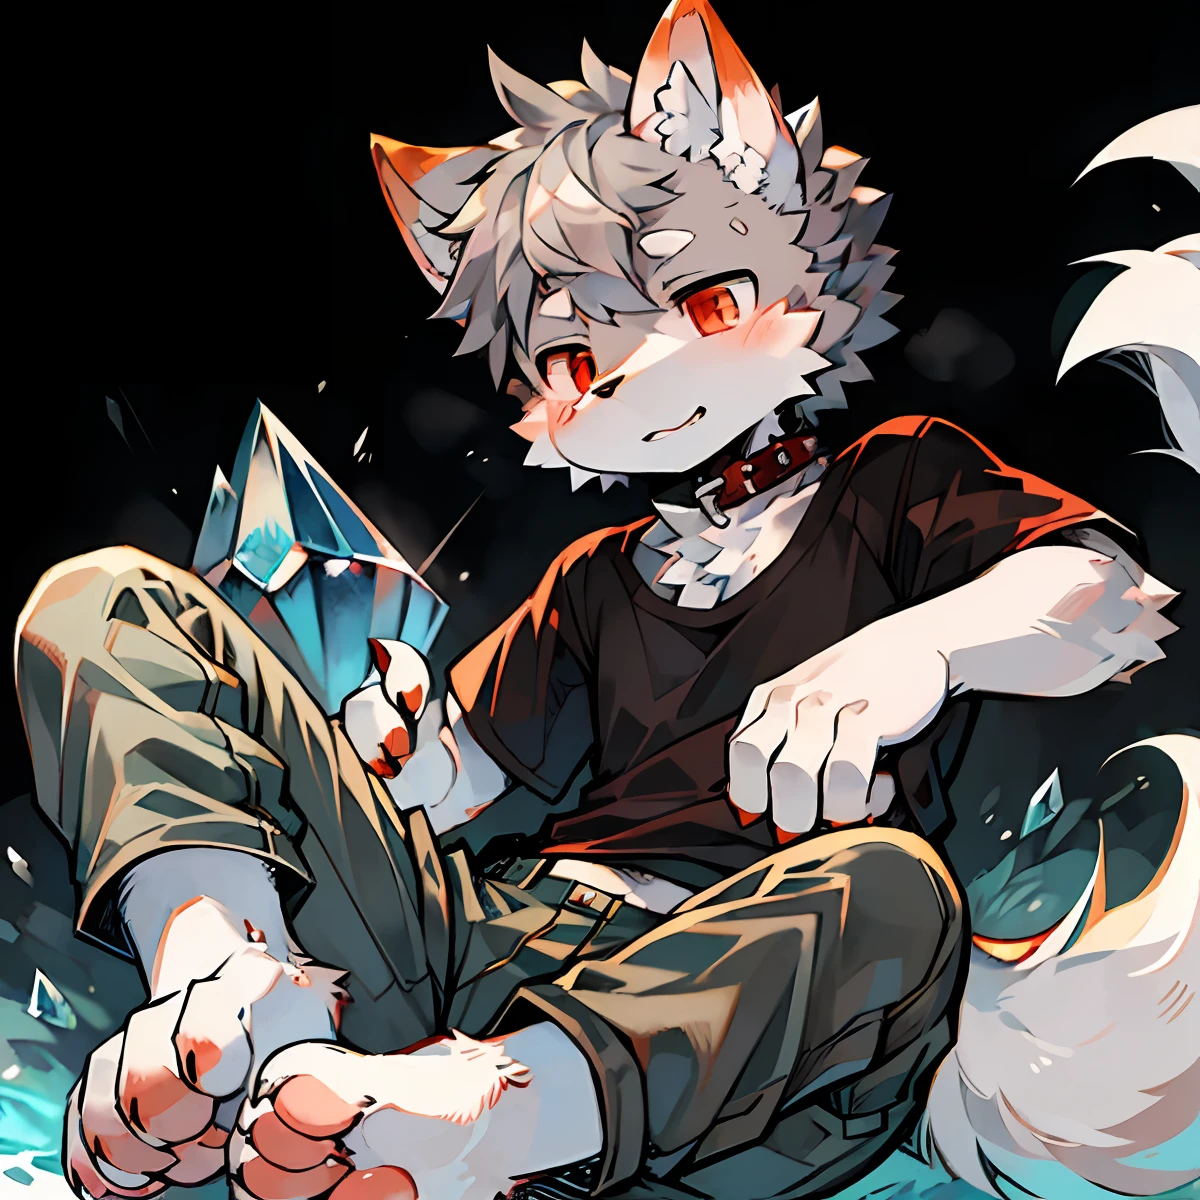 (masterpiece:1.2),(anatomically correct:1.1), (high quality:1.5), (((solo male anthropomorphic))) kemono furry_transformation wolf fursona,1 wolf boy,black fur,crystal red eyes, (sky bule nose),white hands paws, white feet, canine hands, (detail canine feet:1.2),4 toes, black beans, detail beans,((1 wolf boy)),[digital painting \(artwork\)::0.8], 4 toes, canine feet, (motion lines:1.1),single fluffy tail,[watercolor (artwork):0.6],collar,kemono,grey hair, short hair, T-shirts,gray short pants